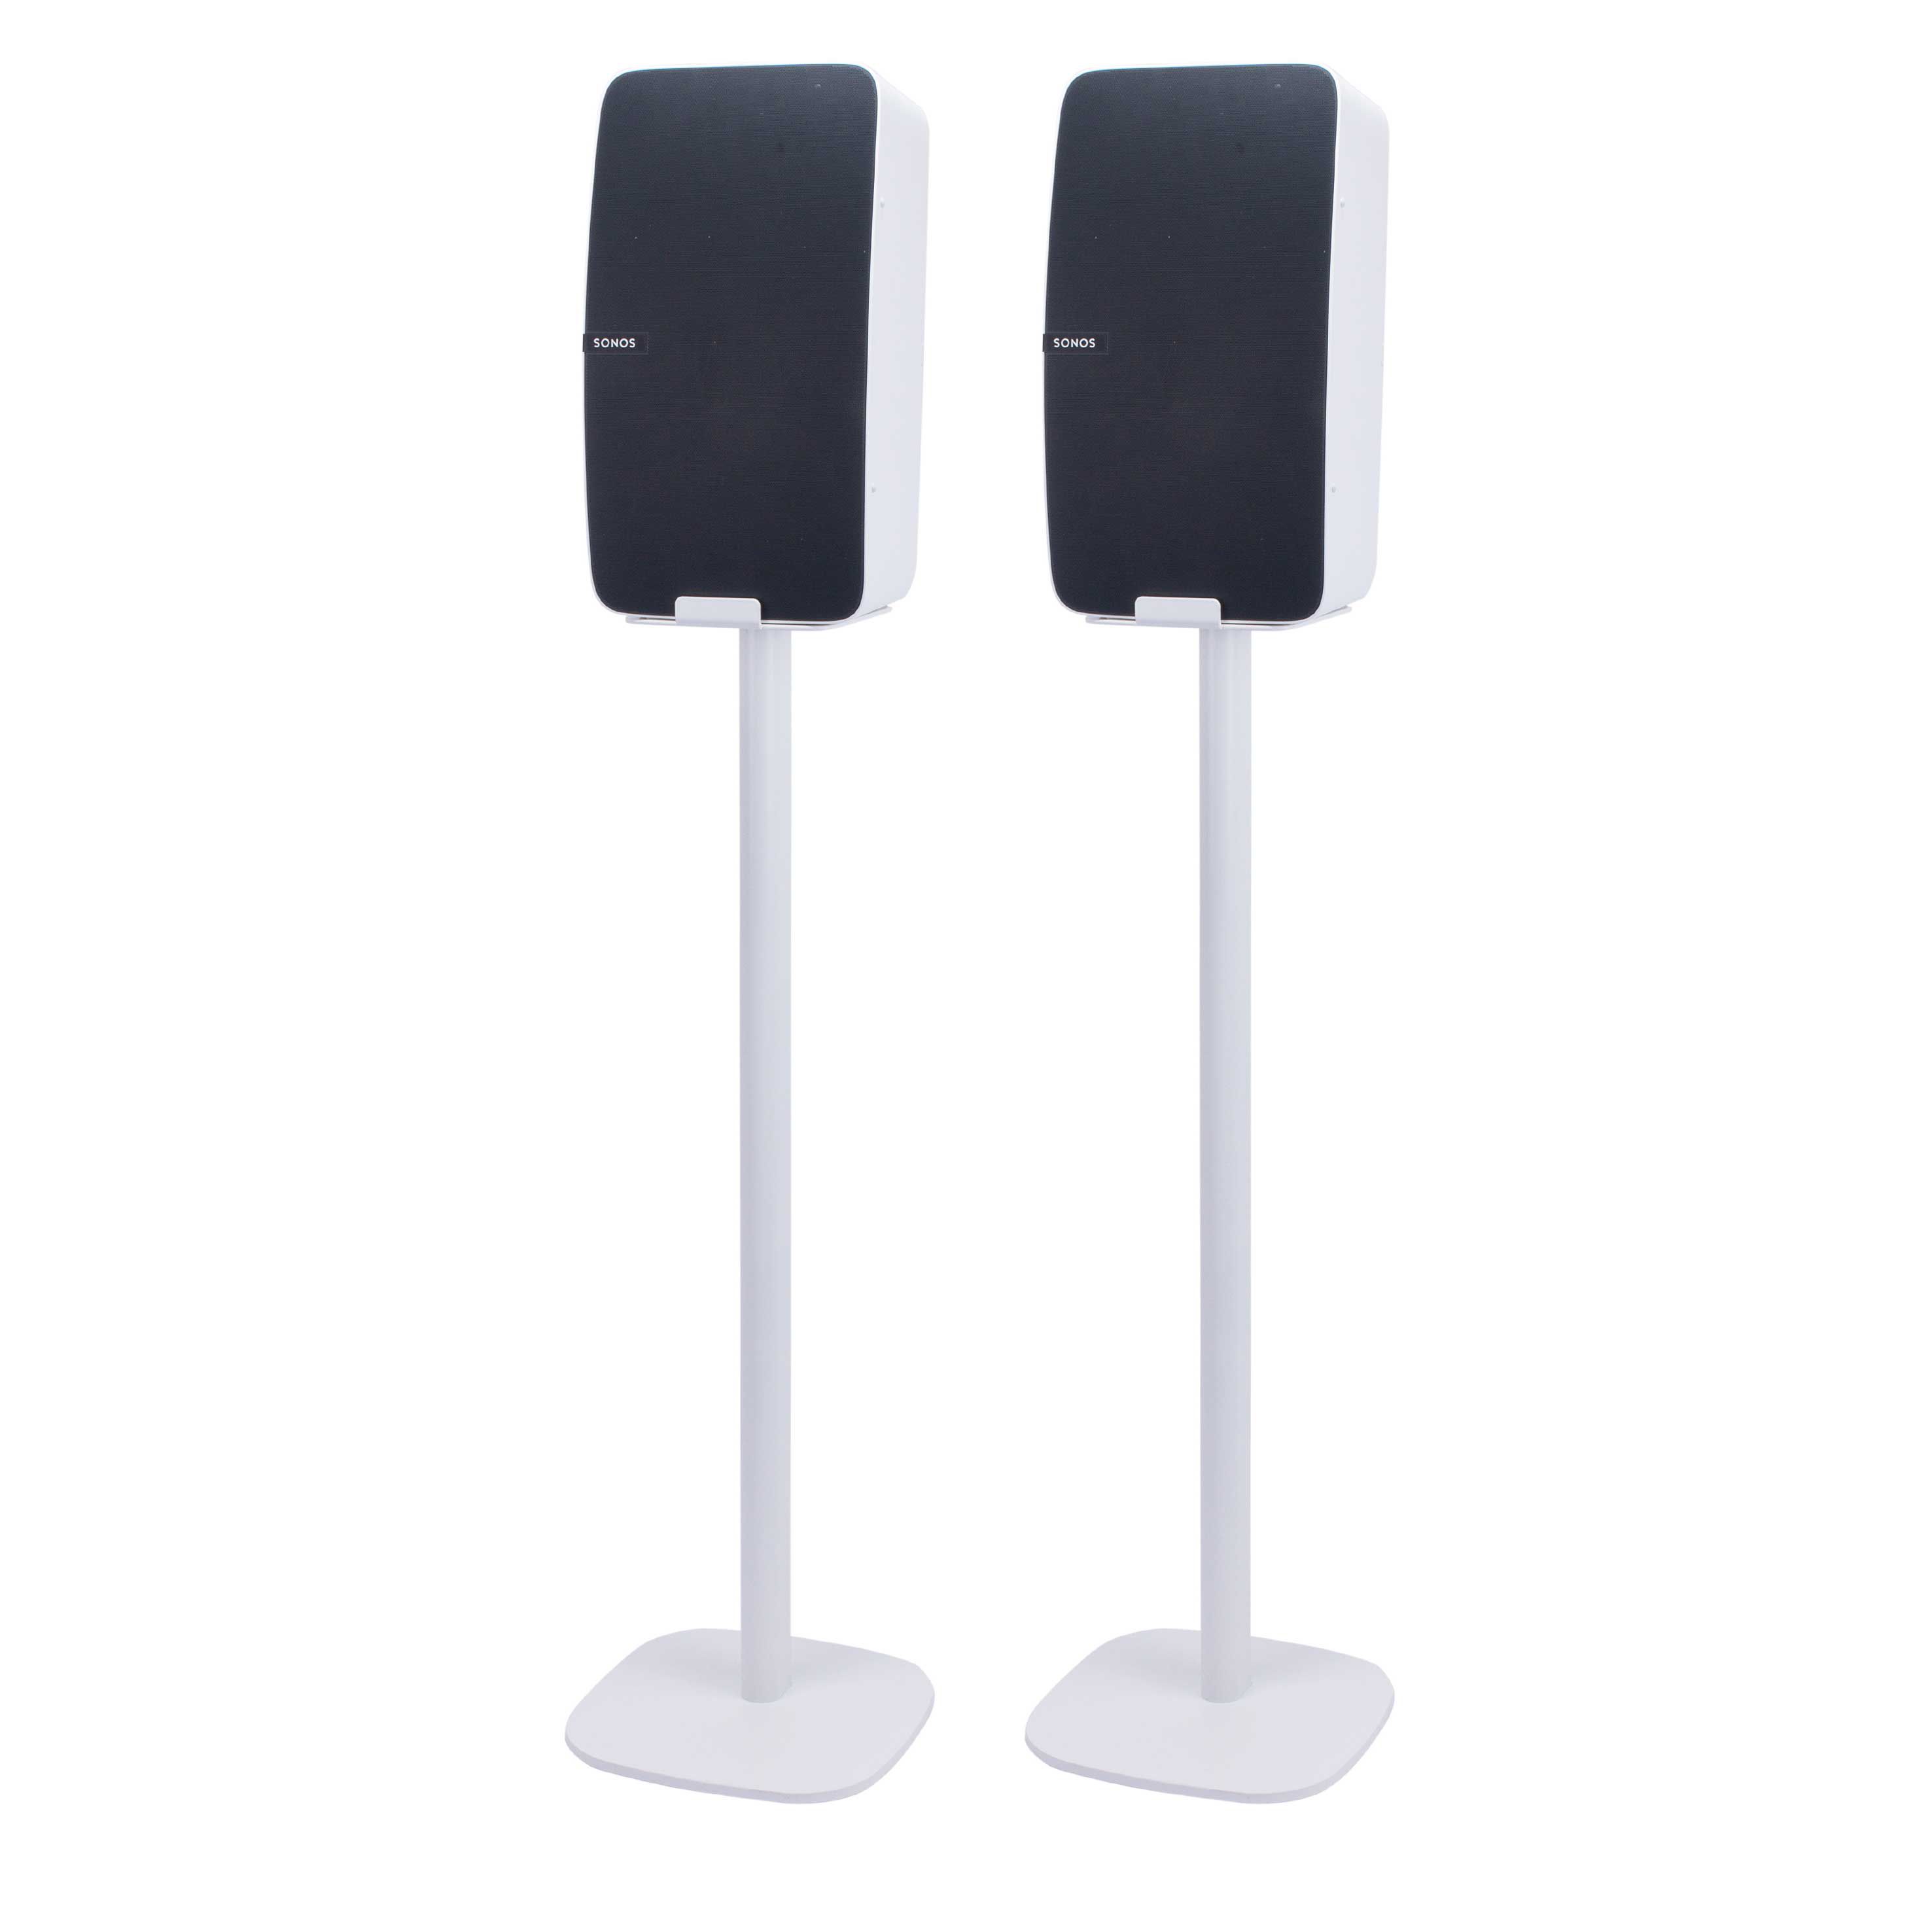 Vebos floor stand Sonos Play 5 white set The stand for gen 2 - vertical